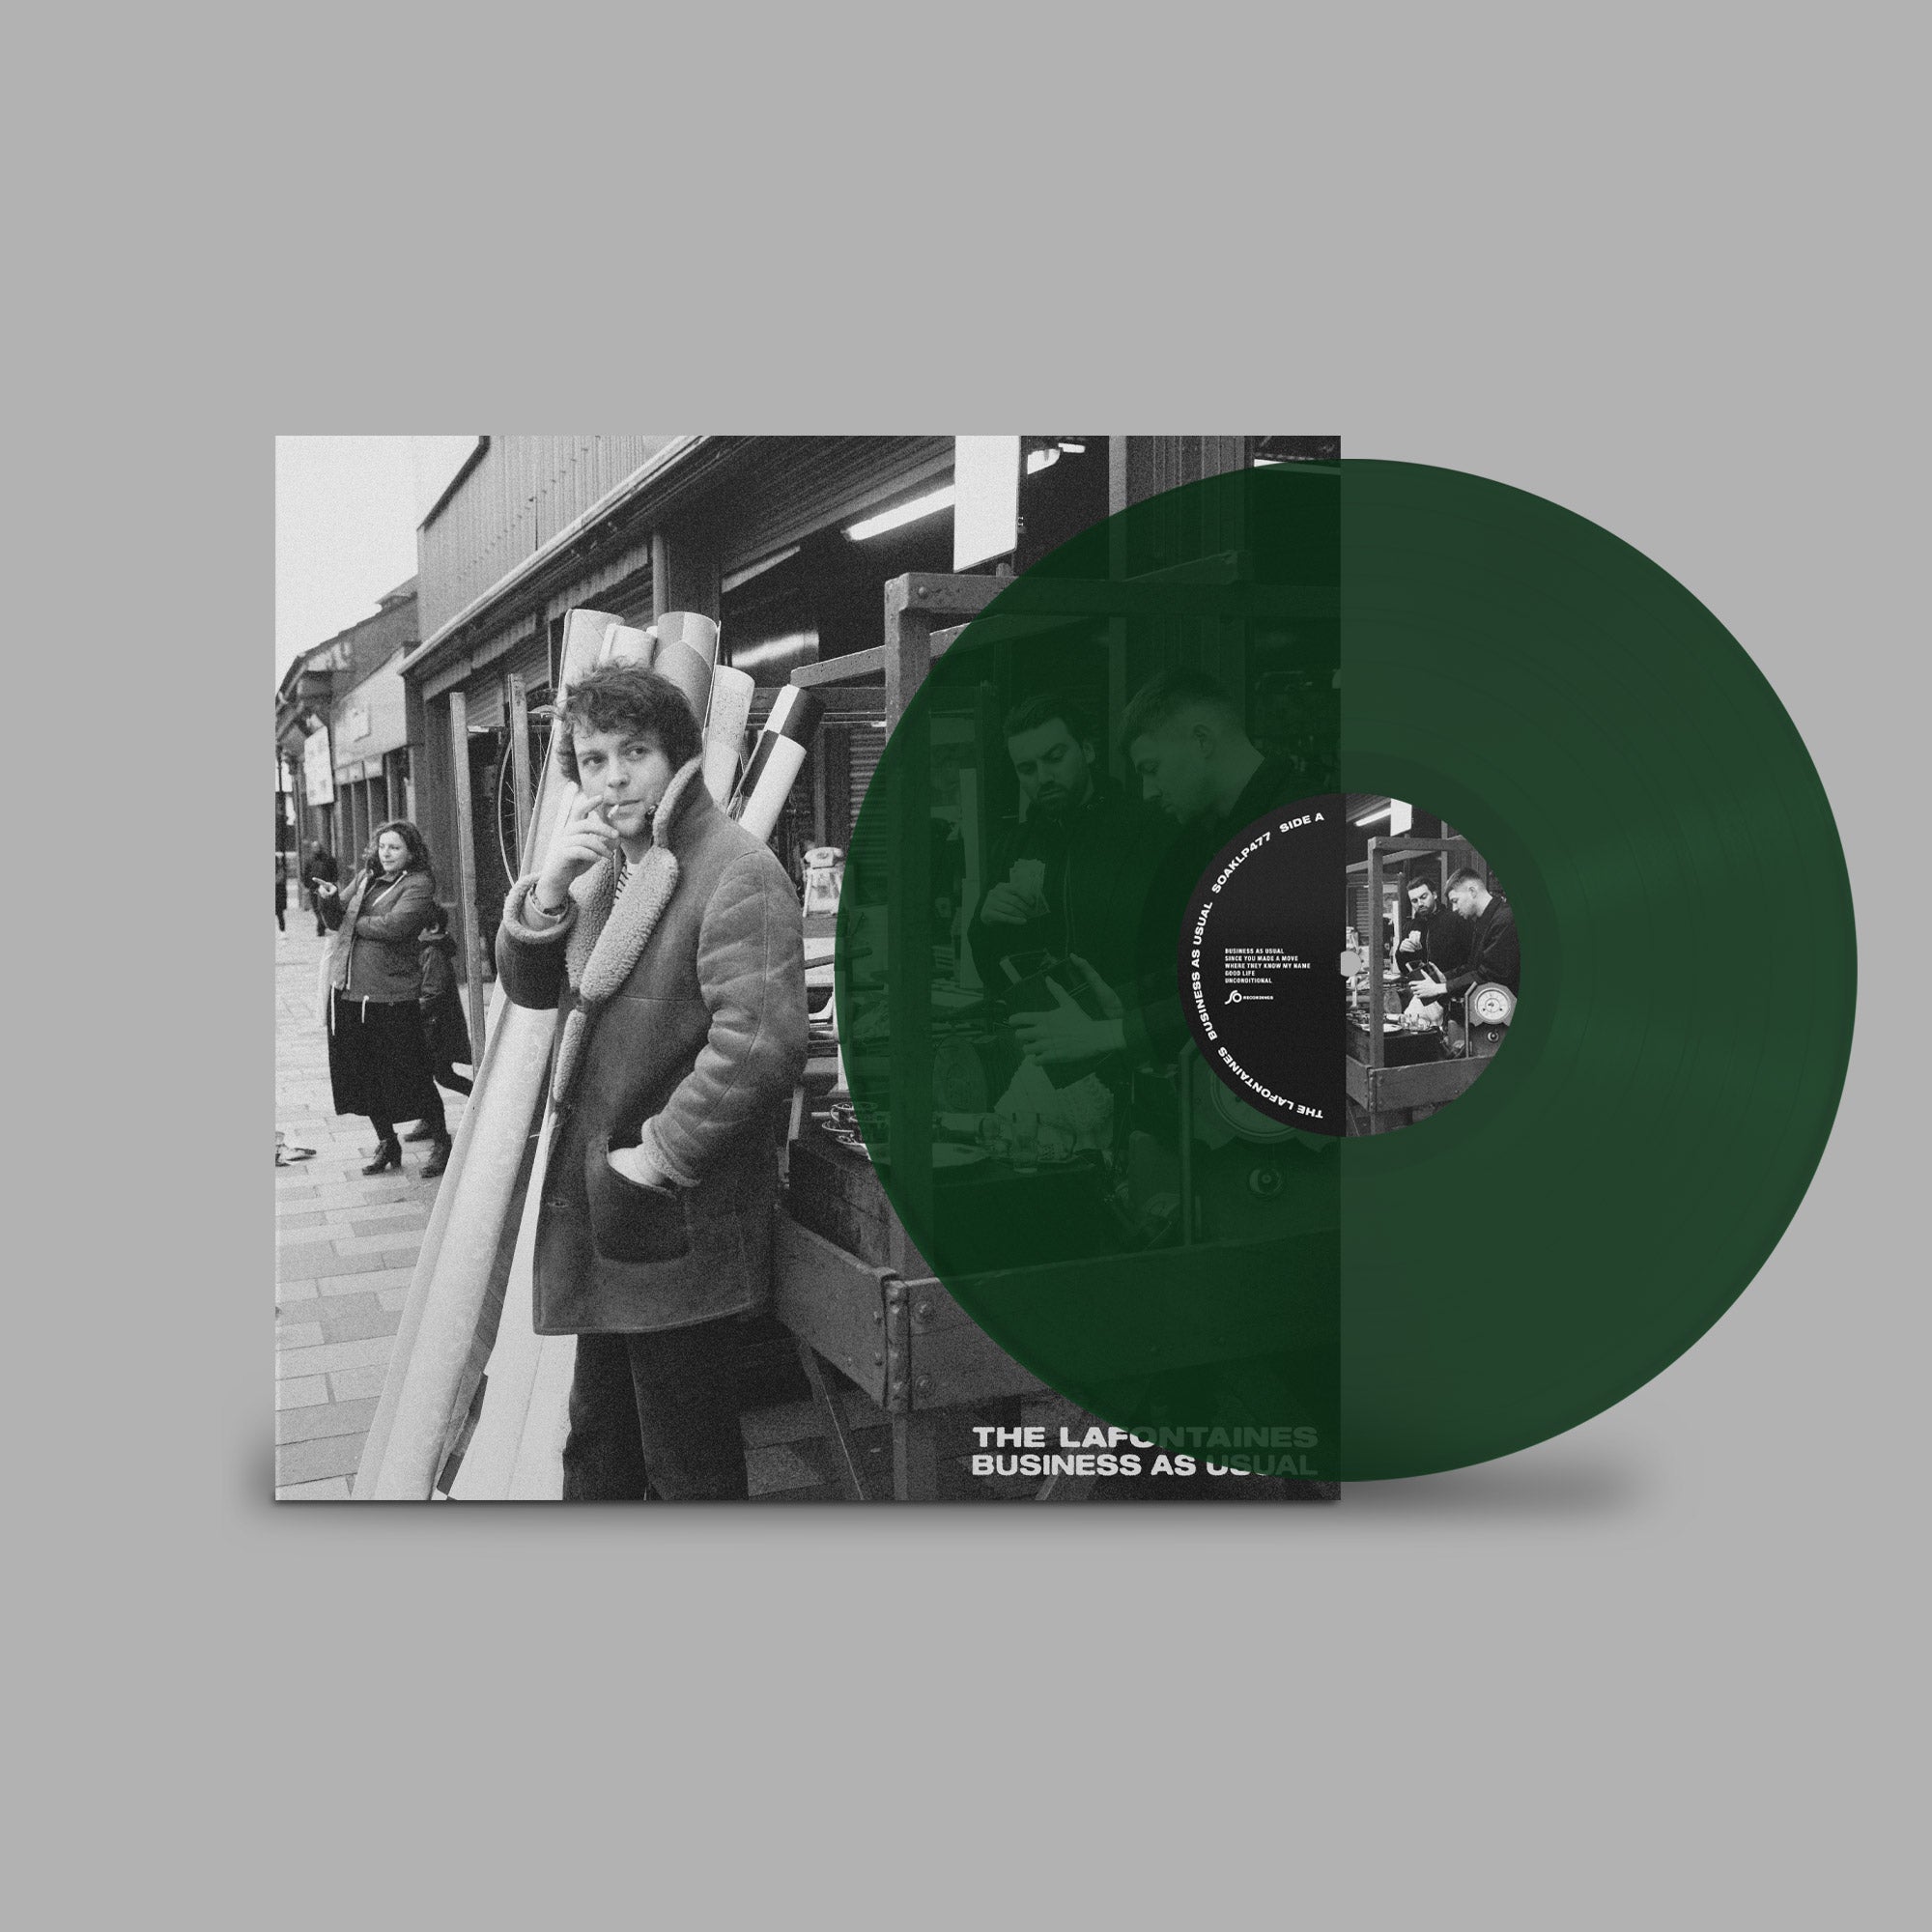 Business As Usual: Limited Transparent Green Vinyl LP + Signed Print